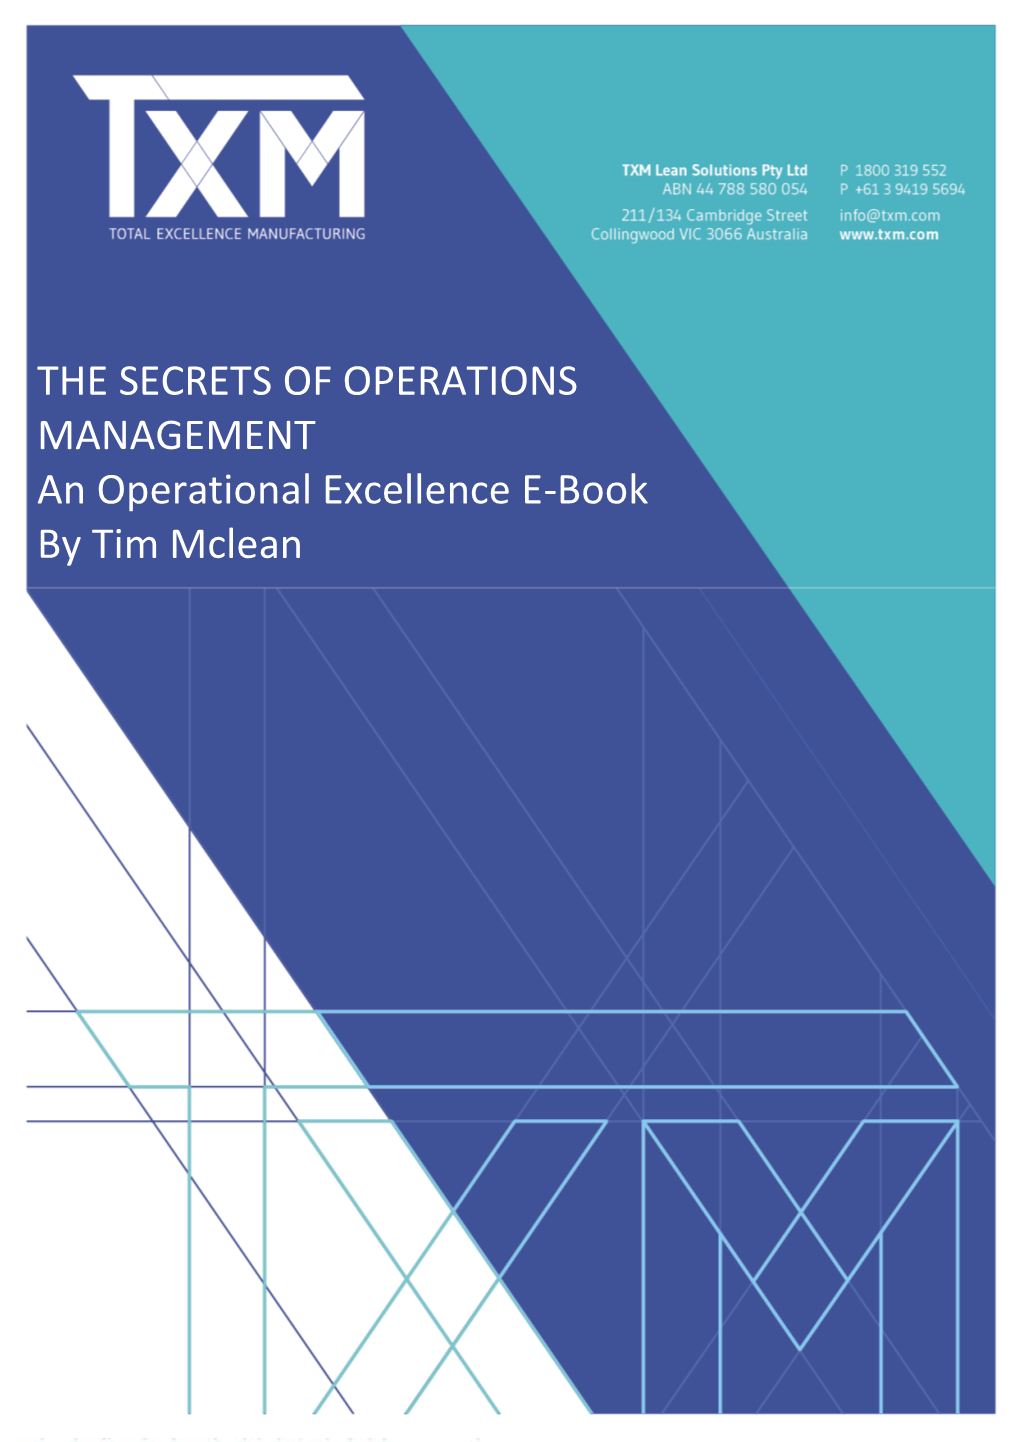 The Secrets of Operations Management